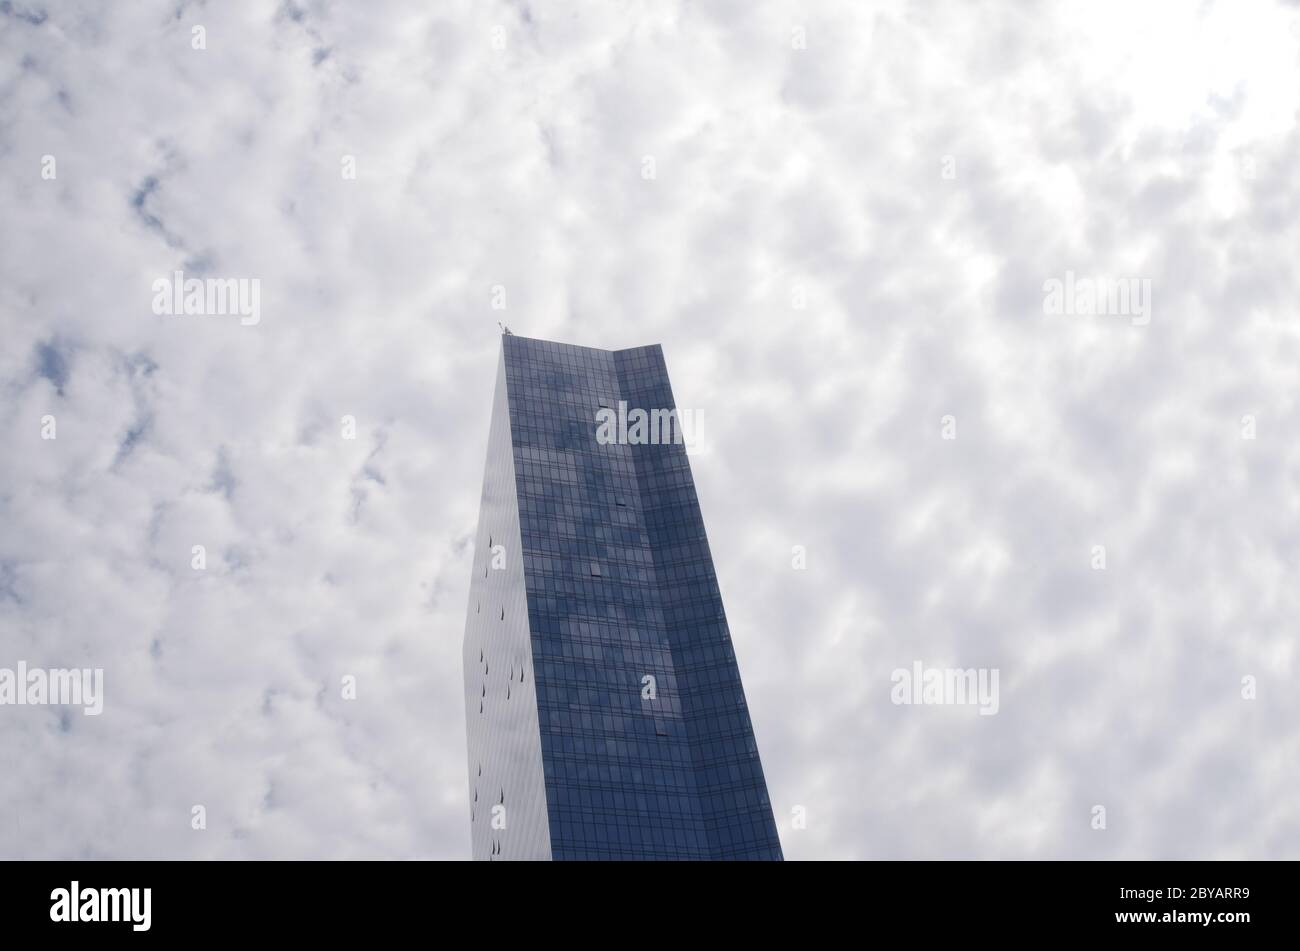 TOWER ONE: A single luxury high rise apartment building stands tall into the heavens sky above Fort Lee just before the George Washington Bridge. Stock Photo